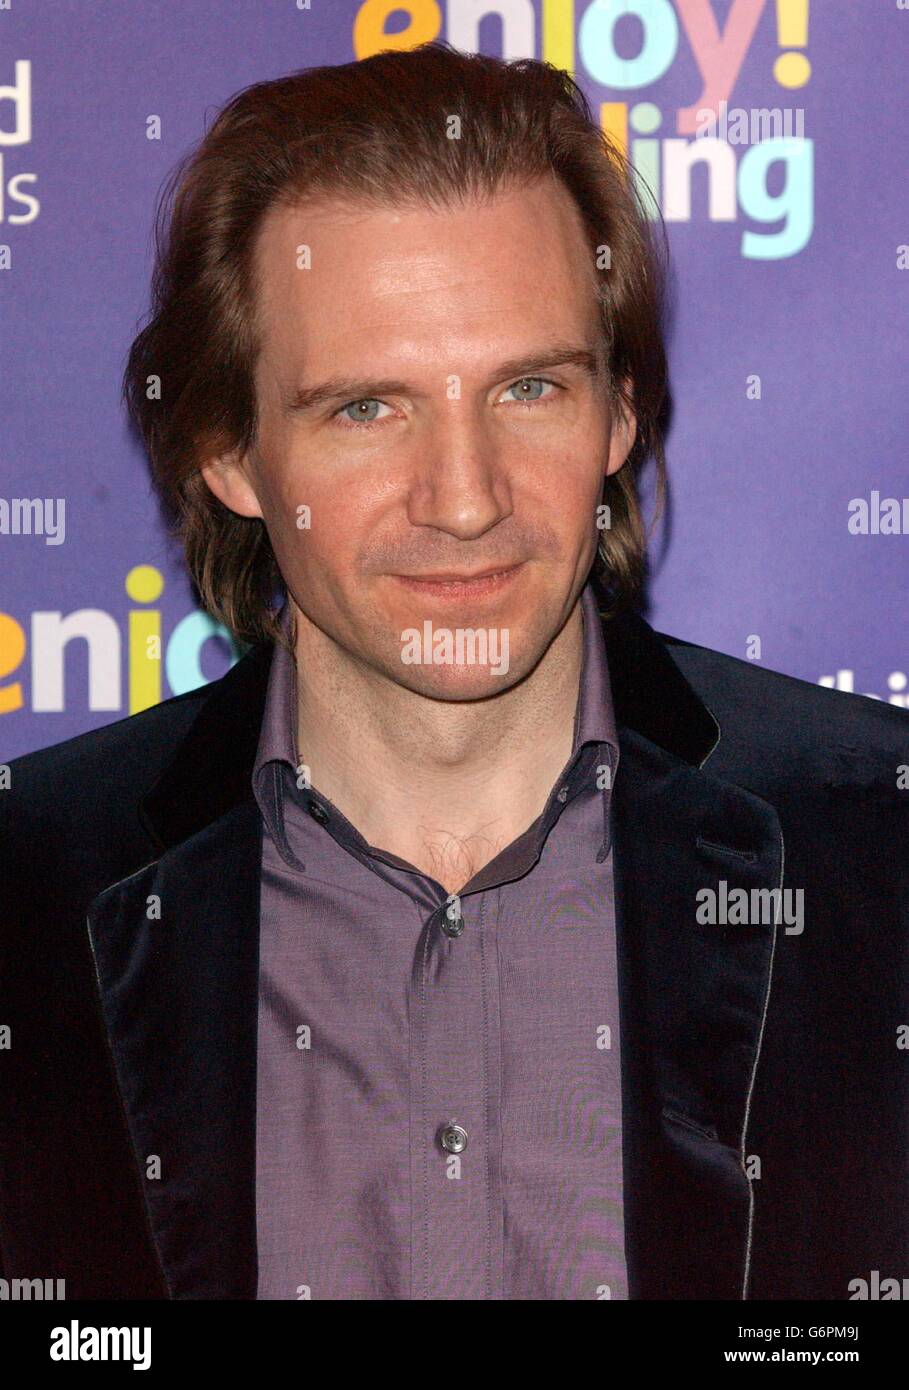 Actor Ralph Fiennes arrives at the Whitbread Book Of The Year Awards 2003 at The Brewery in east London. 05/08/04: Ralph Fiennes, who played memorable evil guys in Red Dragon and Schindler's List, and who has signed on to play the wicked warlock Voldemort in the next Harry Potter movie. Voldemort is so bad that the magical characters in author J.K. Rowling's stories do their best not to speak his name aloud. Harry Potter and the Goblet of Fire, directed by Four Weddings and a Funeral filmmaker Mike Newell, is scheduled for release in November 2005. Stock Photo